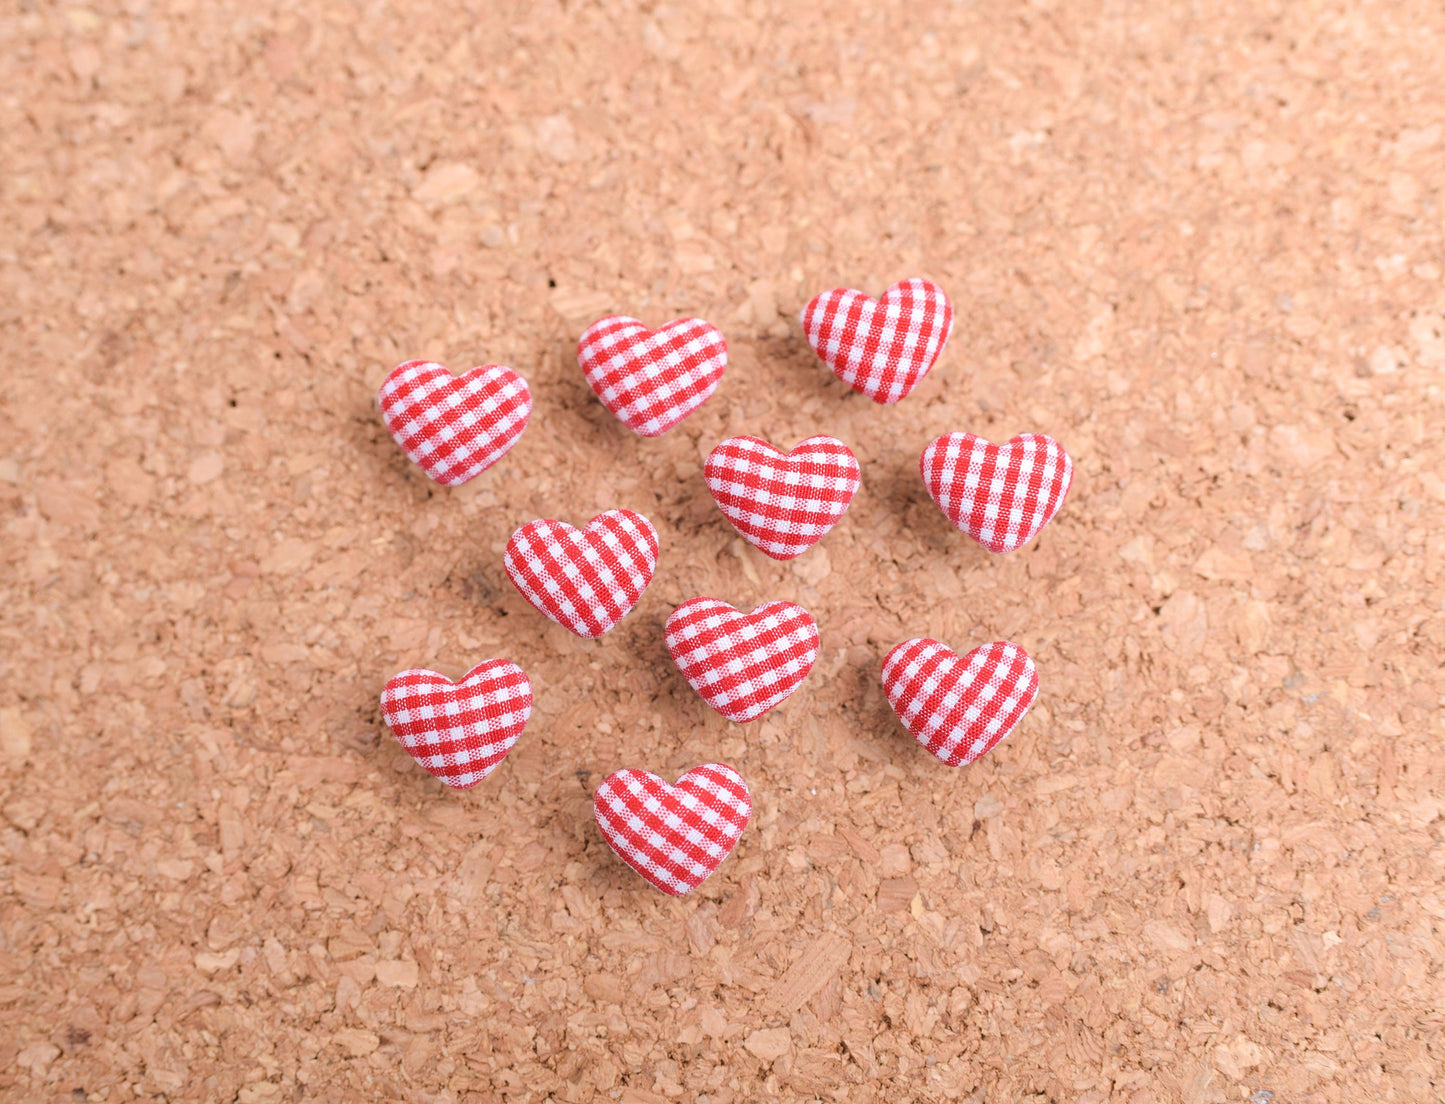 Red and White Farmhouse Heart Fabric Button Push Pins- Set of 10